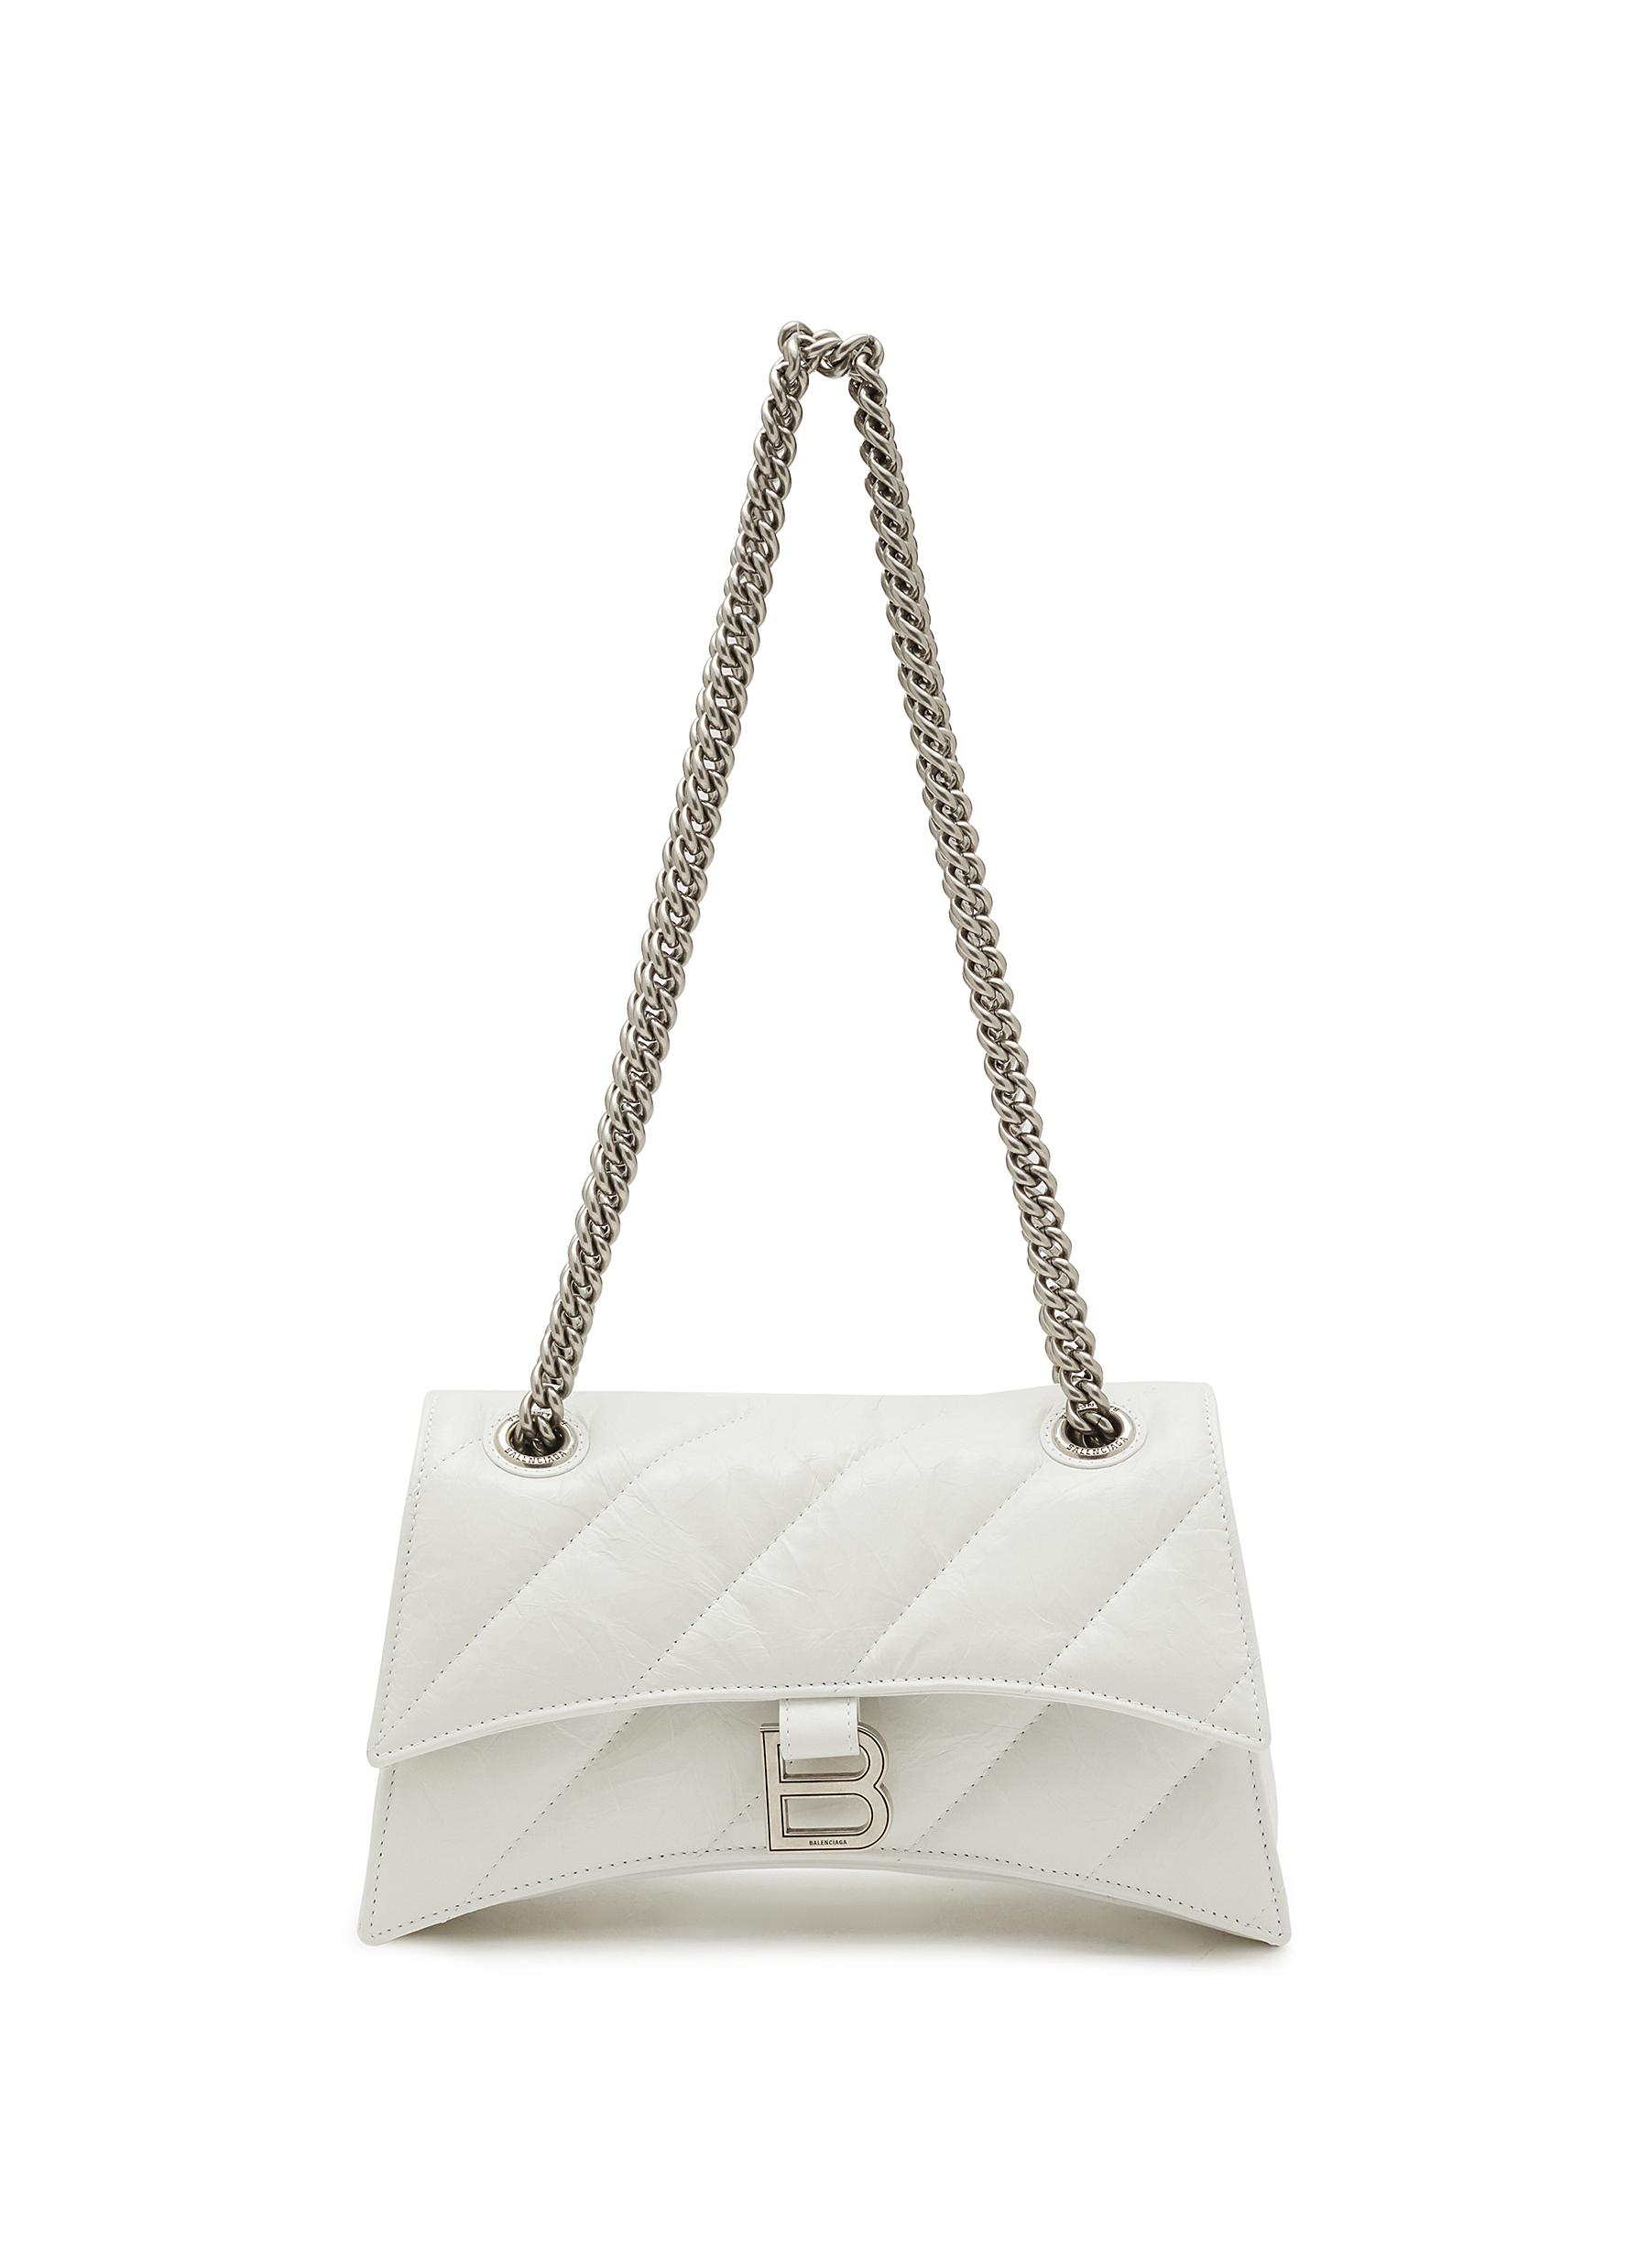 Quilted Chain Strap Shoulder Bag | Dune London | M&S